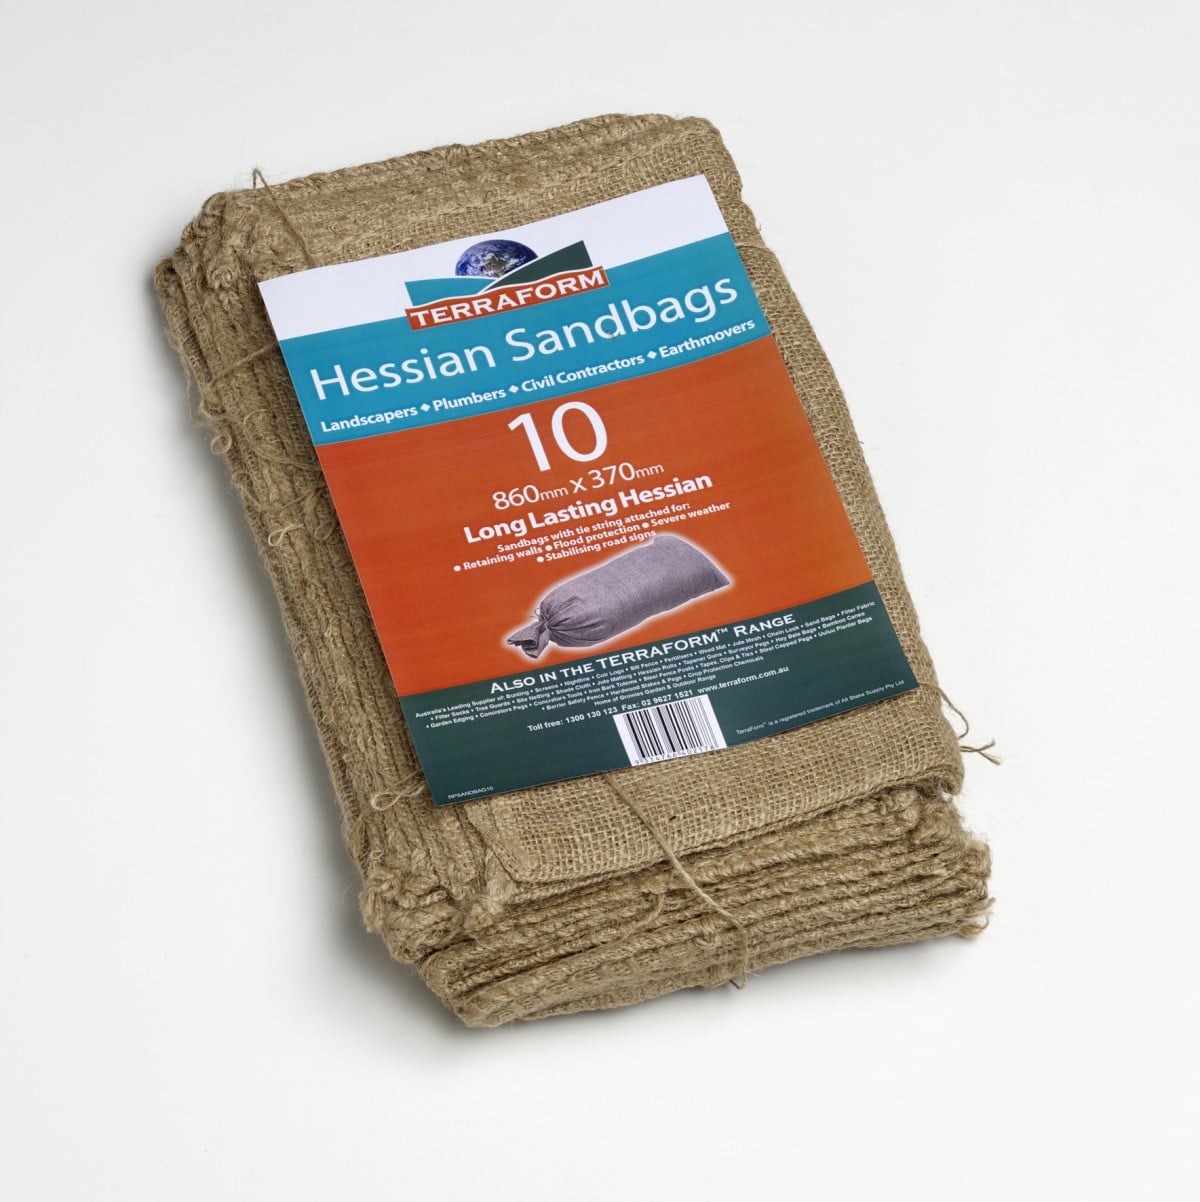 A collection of natural hessian bags displayed against a rustic wooden background. These eco-friendly bags are ideal for various uses, including gardening, packaging, and storing. The bags are made from sustainable materials and feature sturdy handles for convenient carrying. Their neutral color and textured surface add a touch of natural charm to any setting.